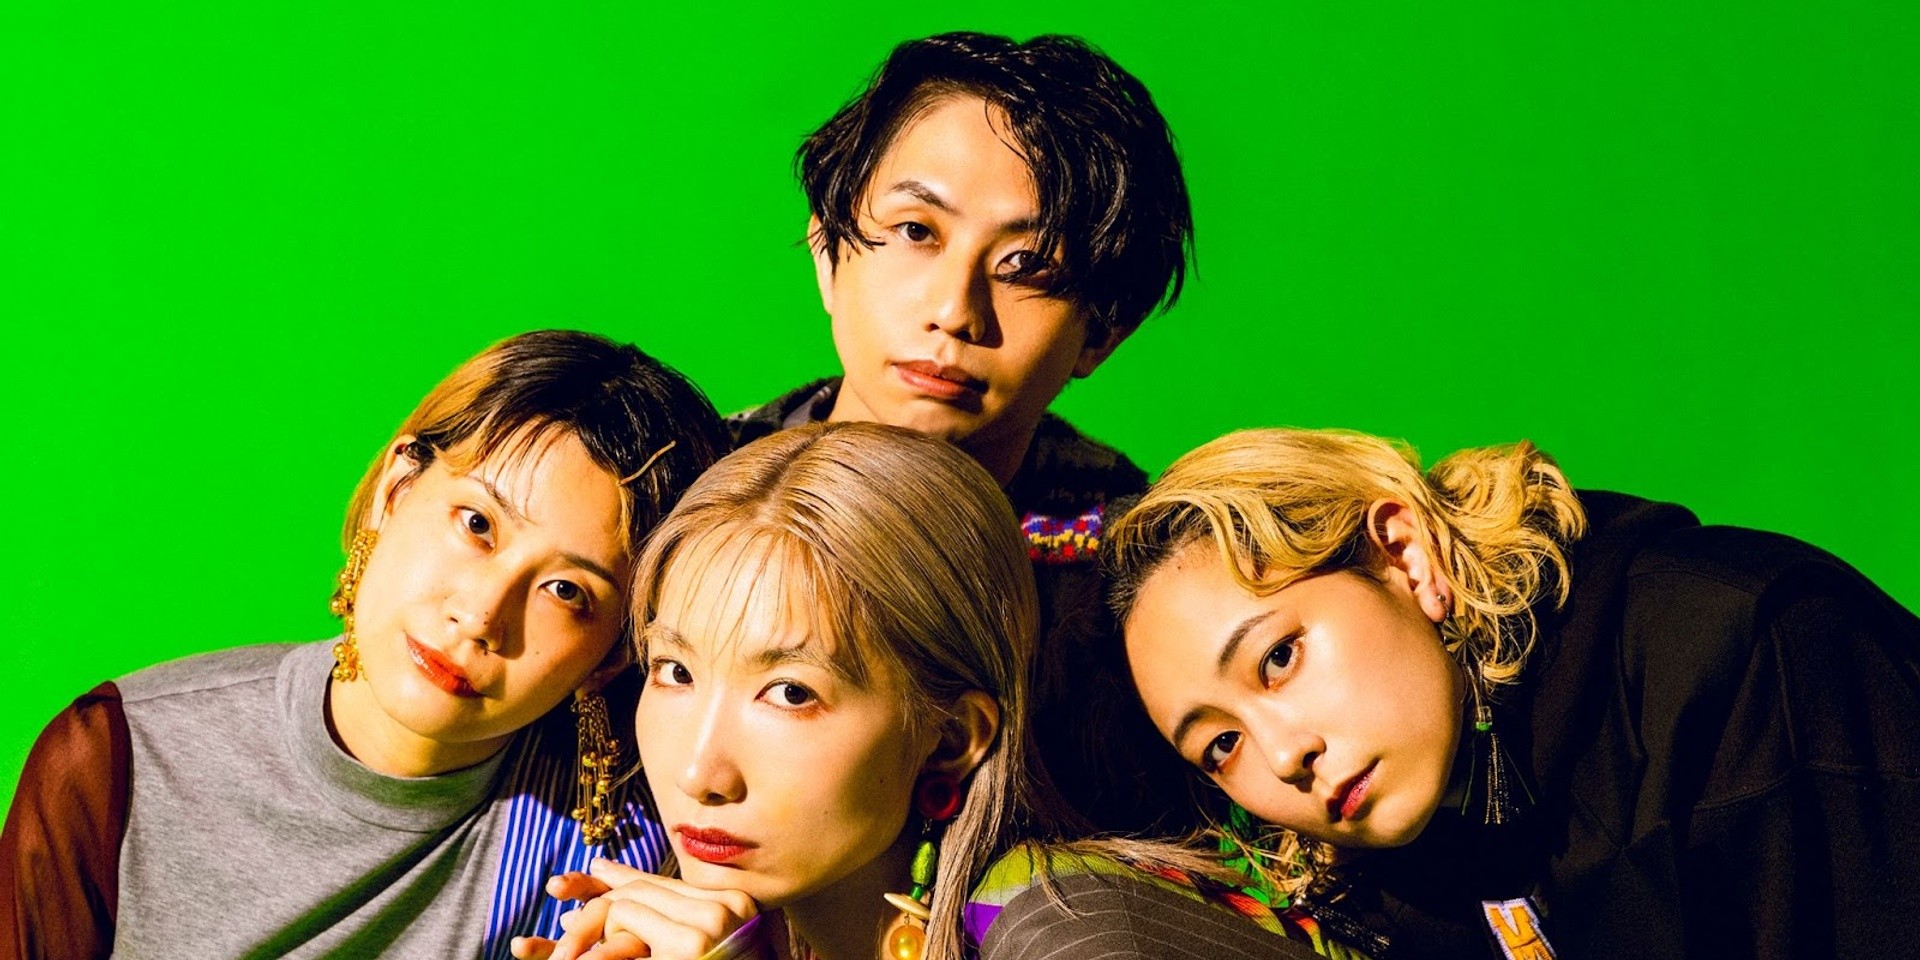 Tricot release captivating new single 'エンドロールに間に合うように (End roll)' for  Japanese TV series, 'liar' — watch